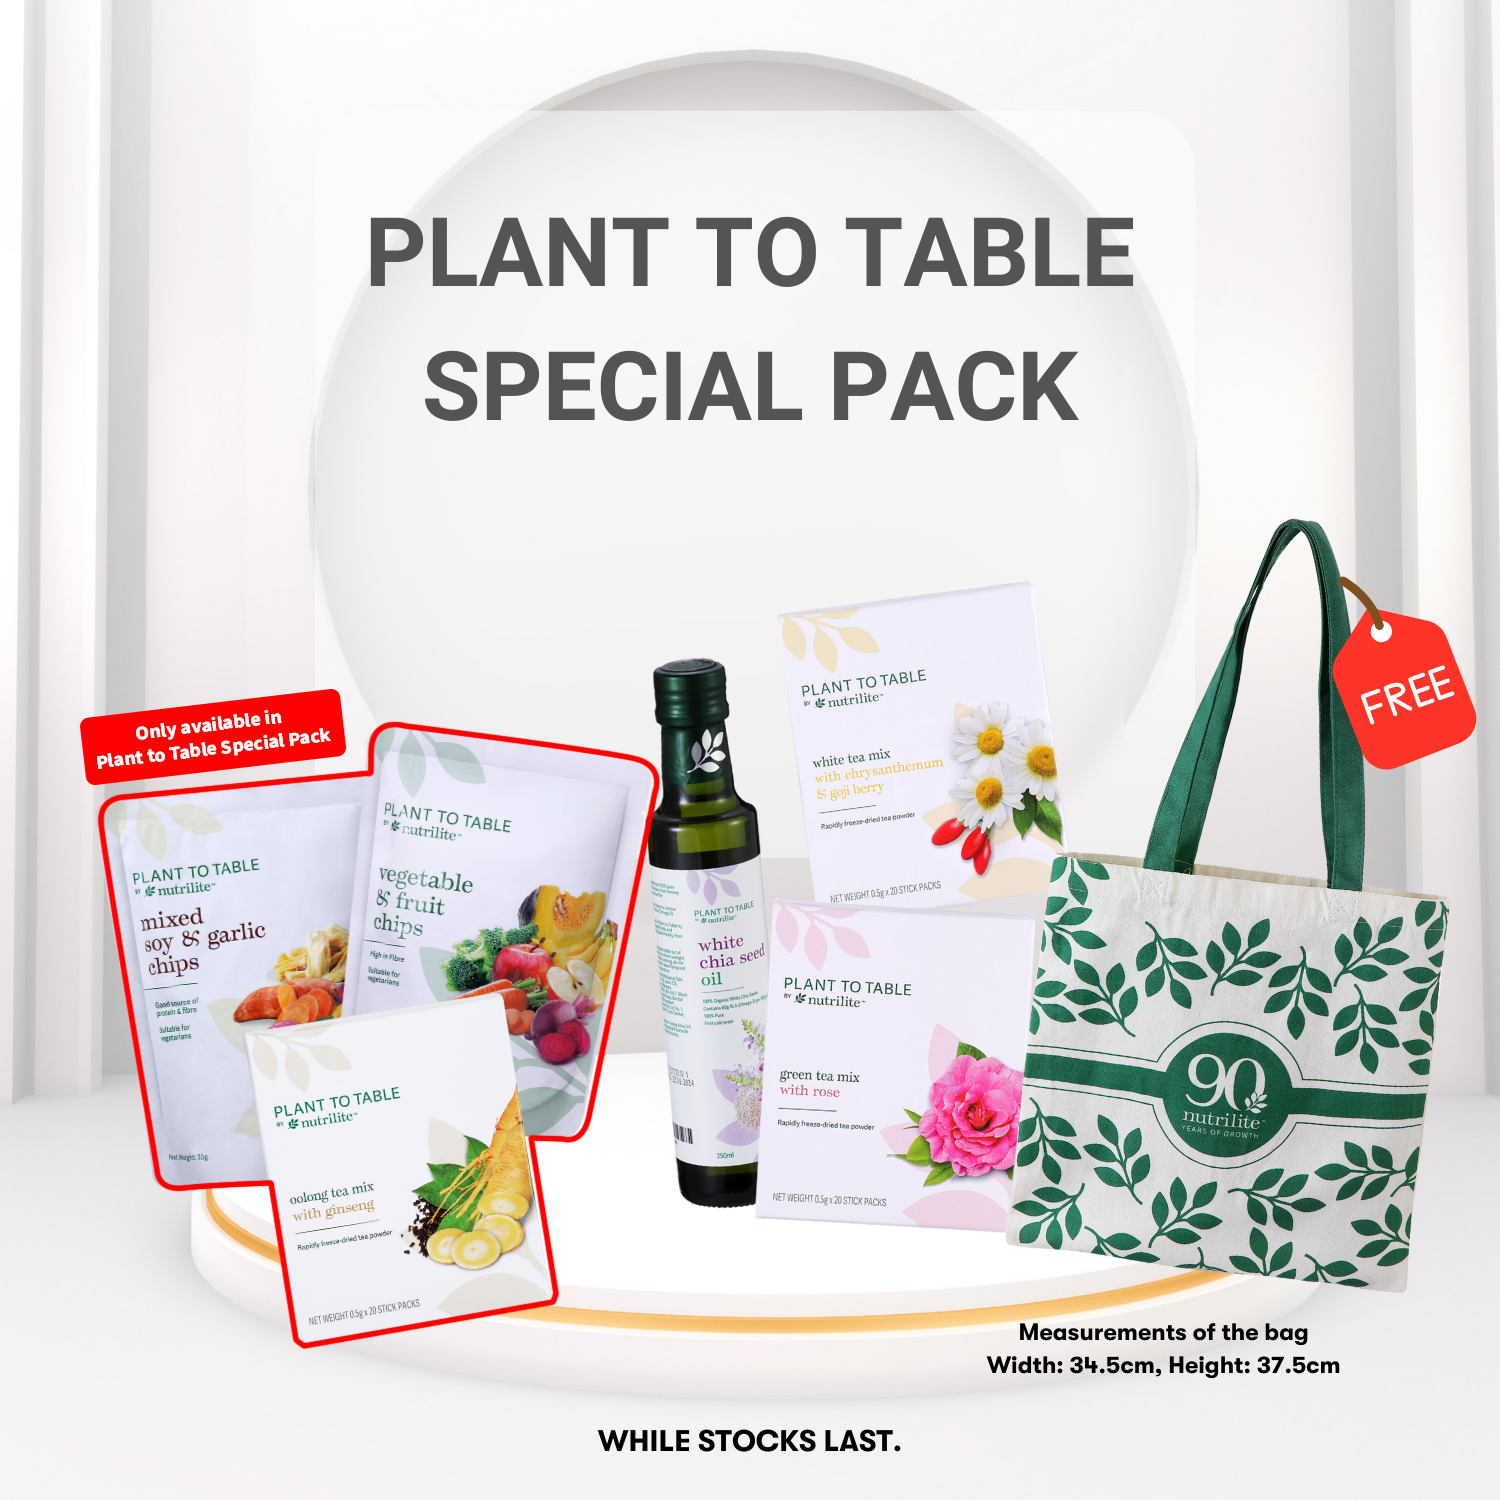 https://media.amway.sg/sys-master/images/hfe/h47/12398800666654/APR-4102-PROMO.png